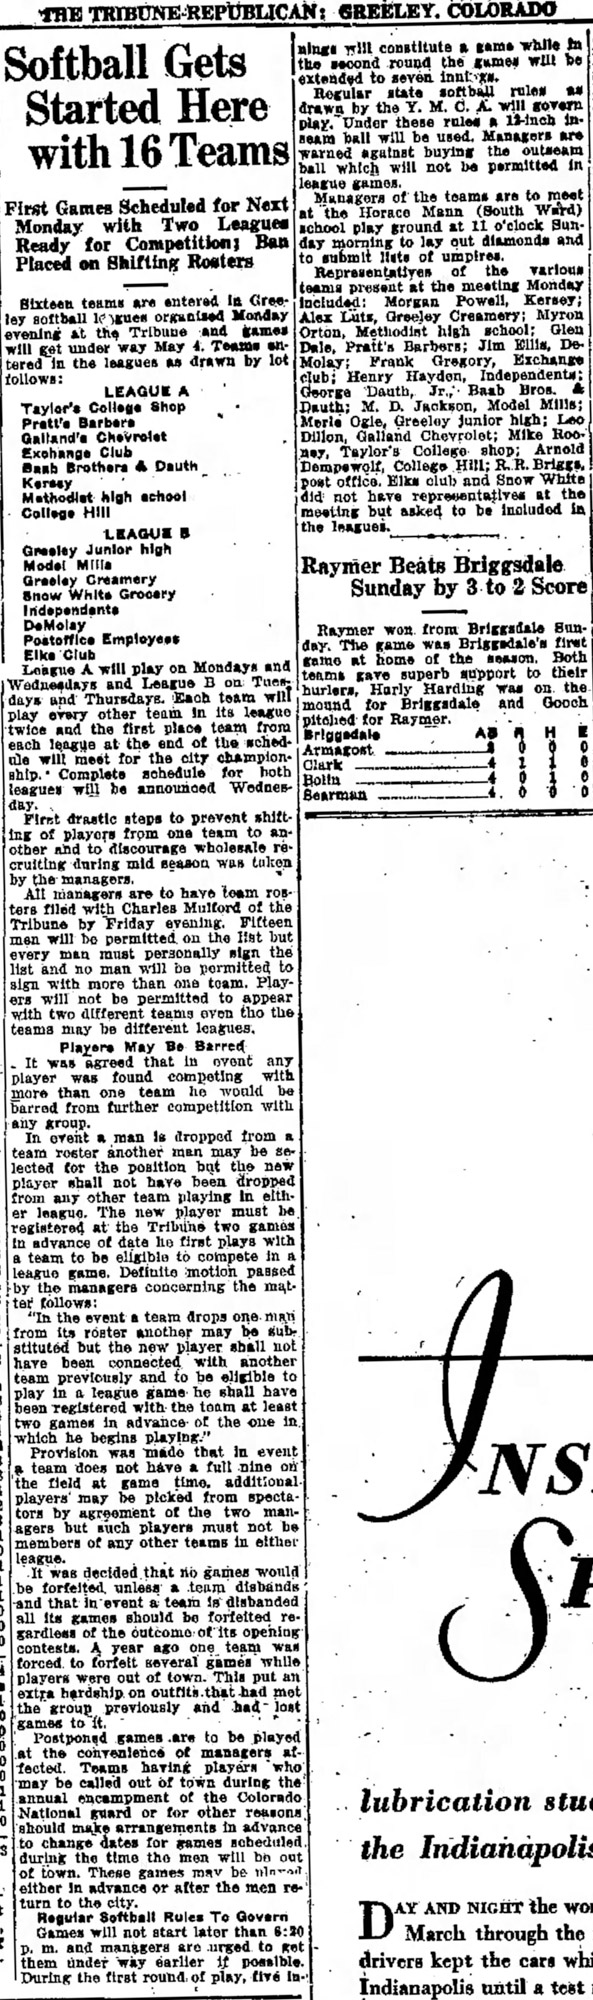 Dauth Family Archive - 1931-04-28 - Greeley Daily Tribune - June Dauth Managing Baab Brothers and Dauth Softball Team